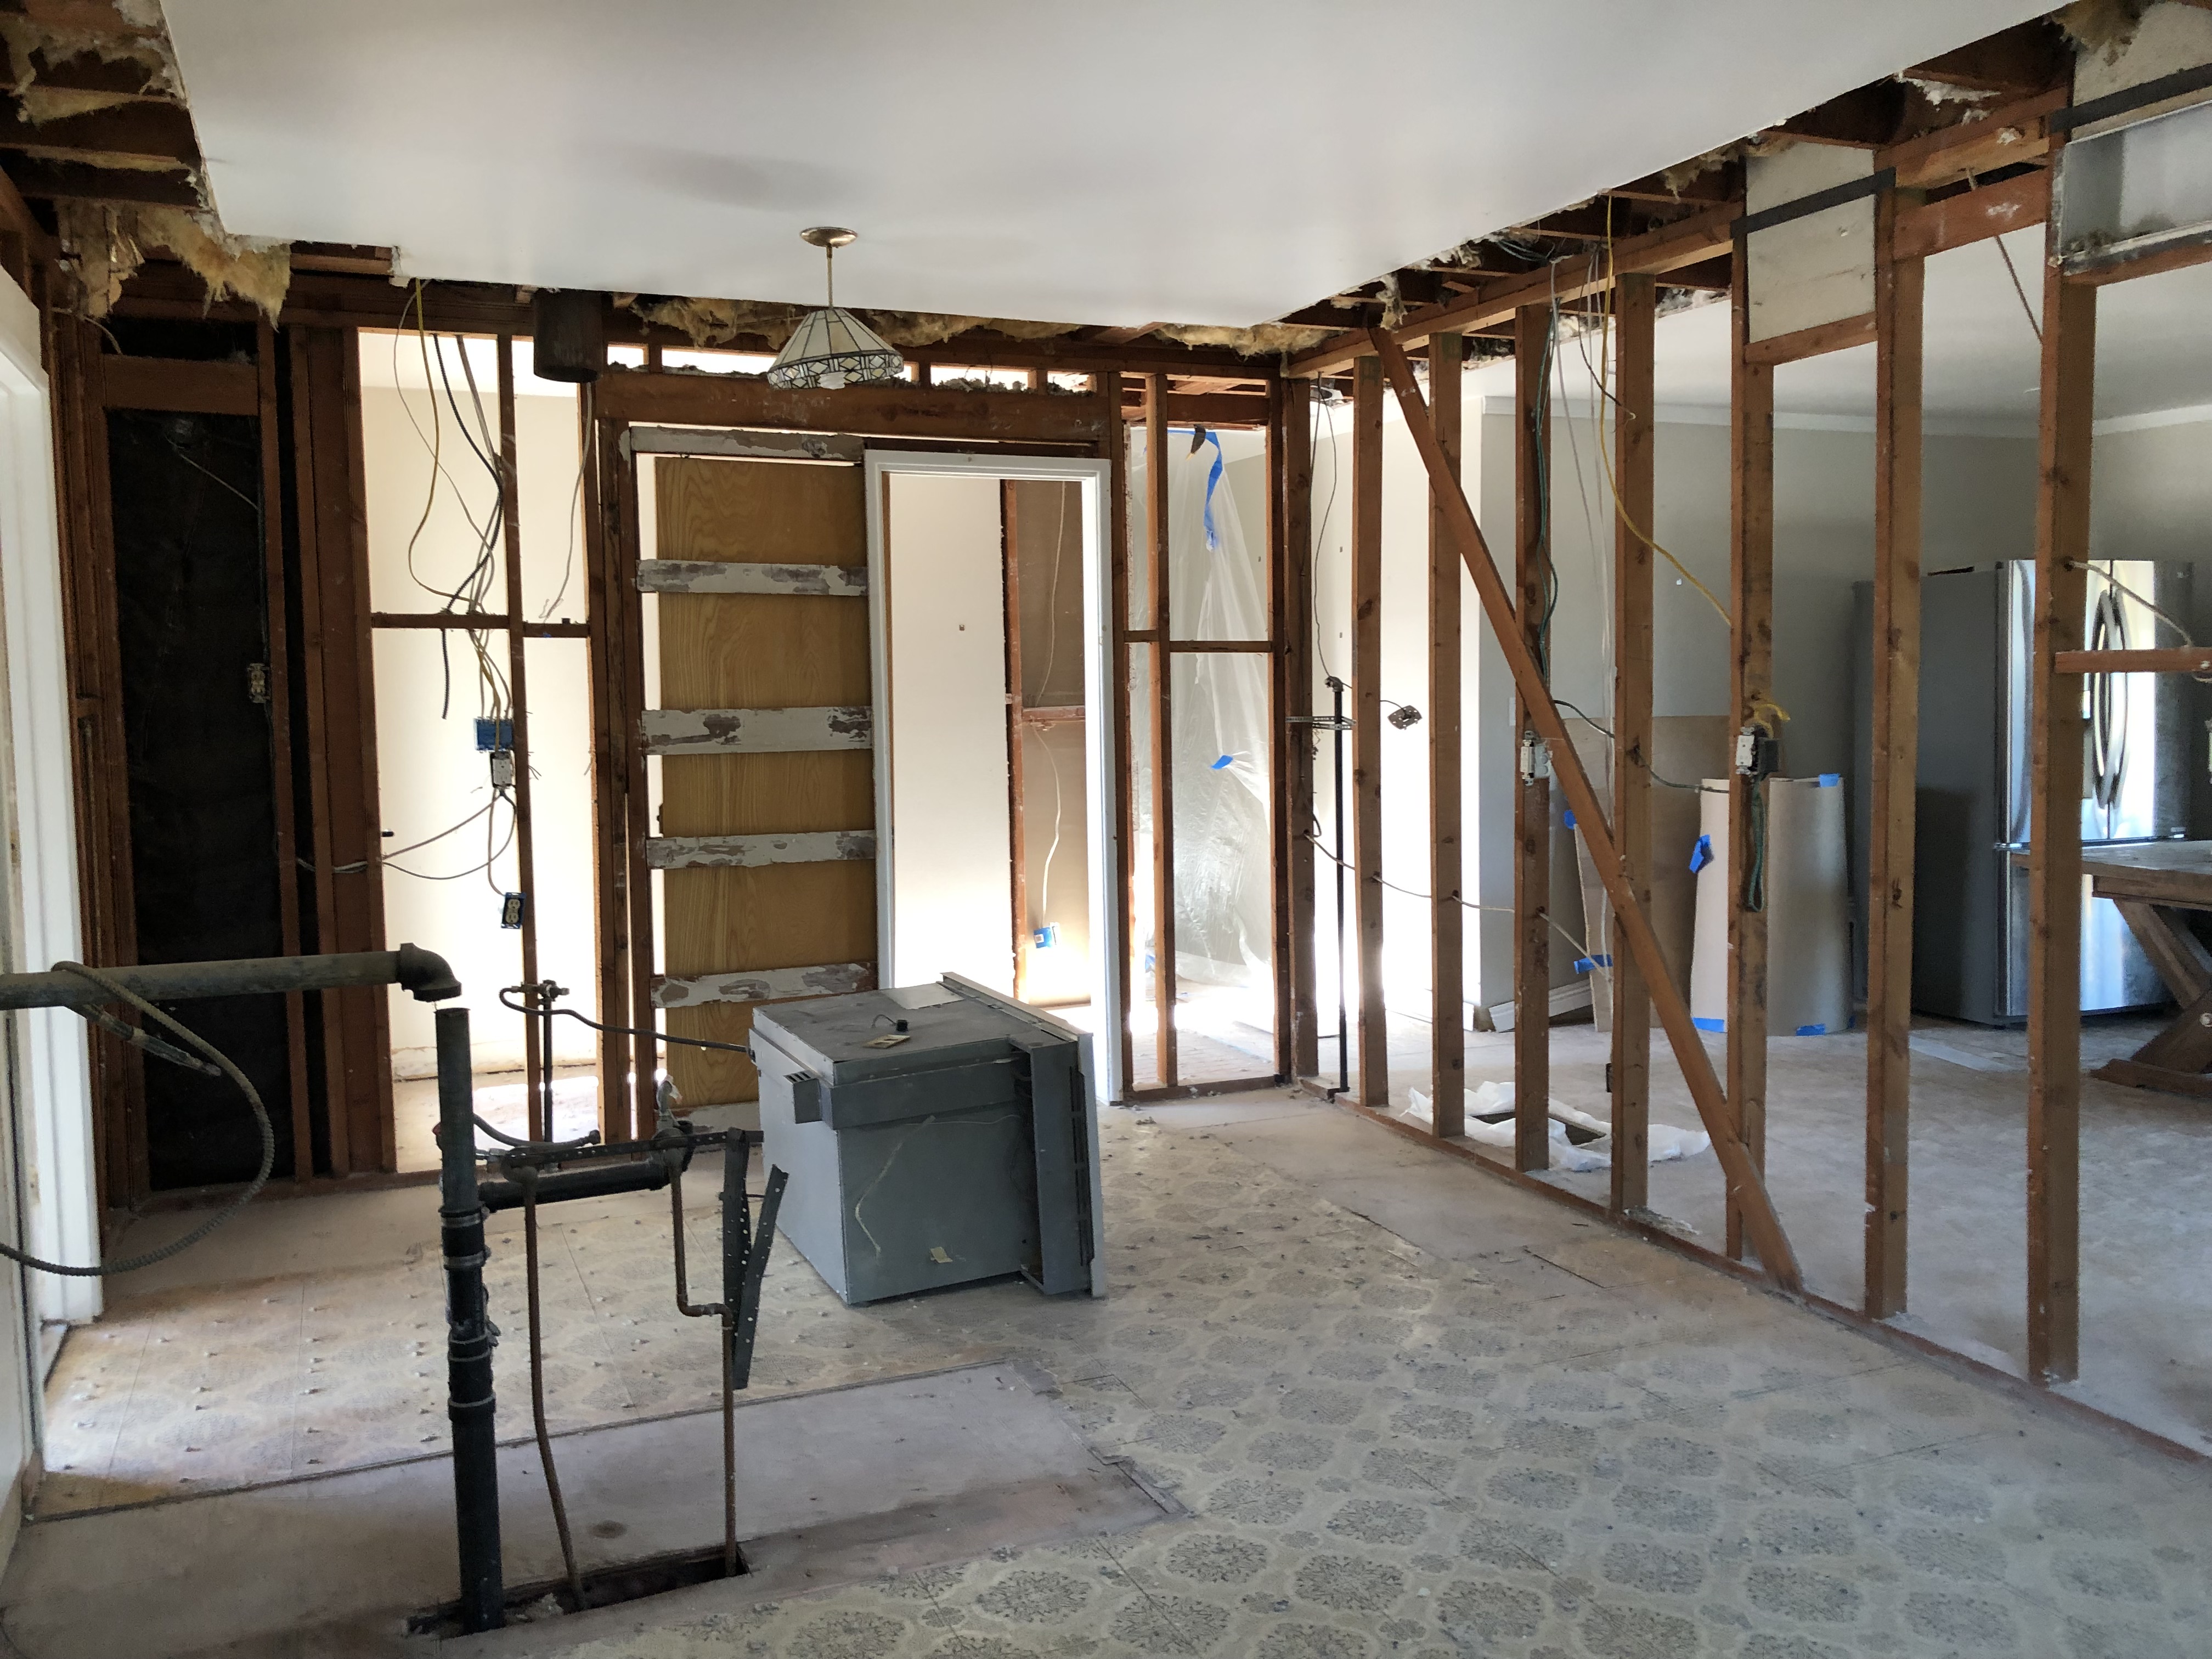 plaster-walls-removed-exposing-the-wood-frames